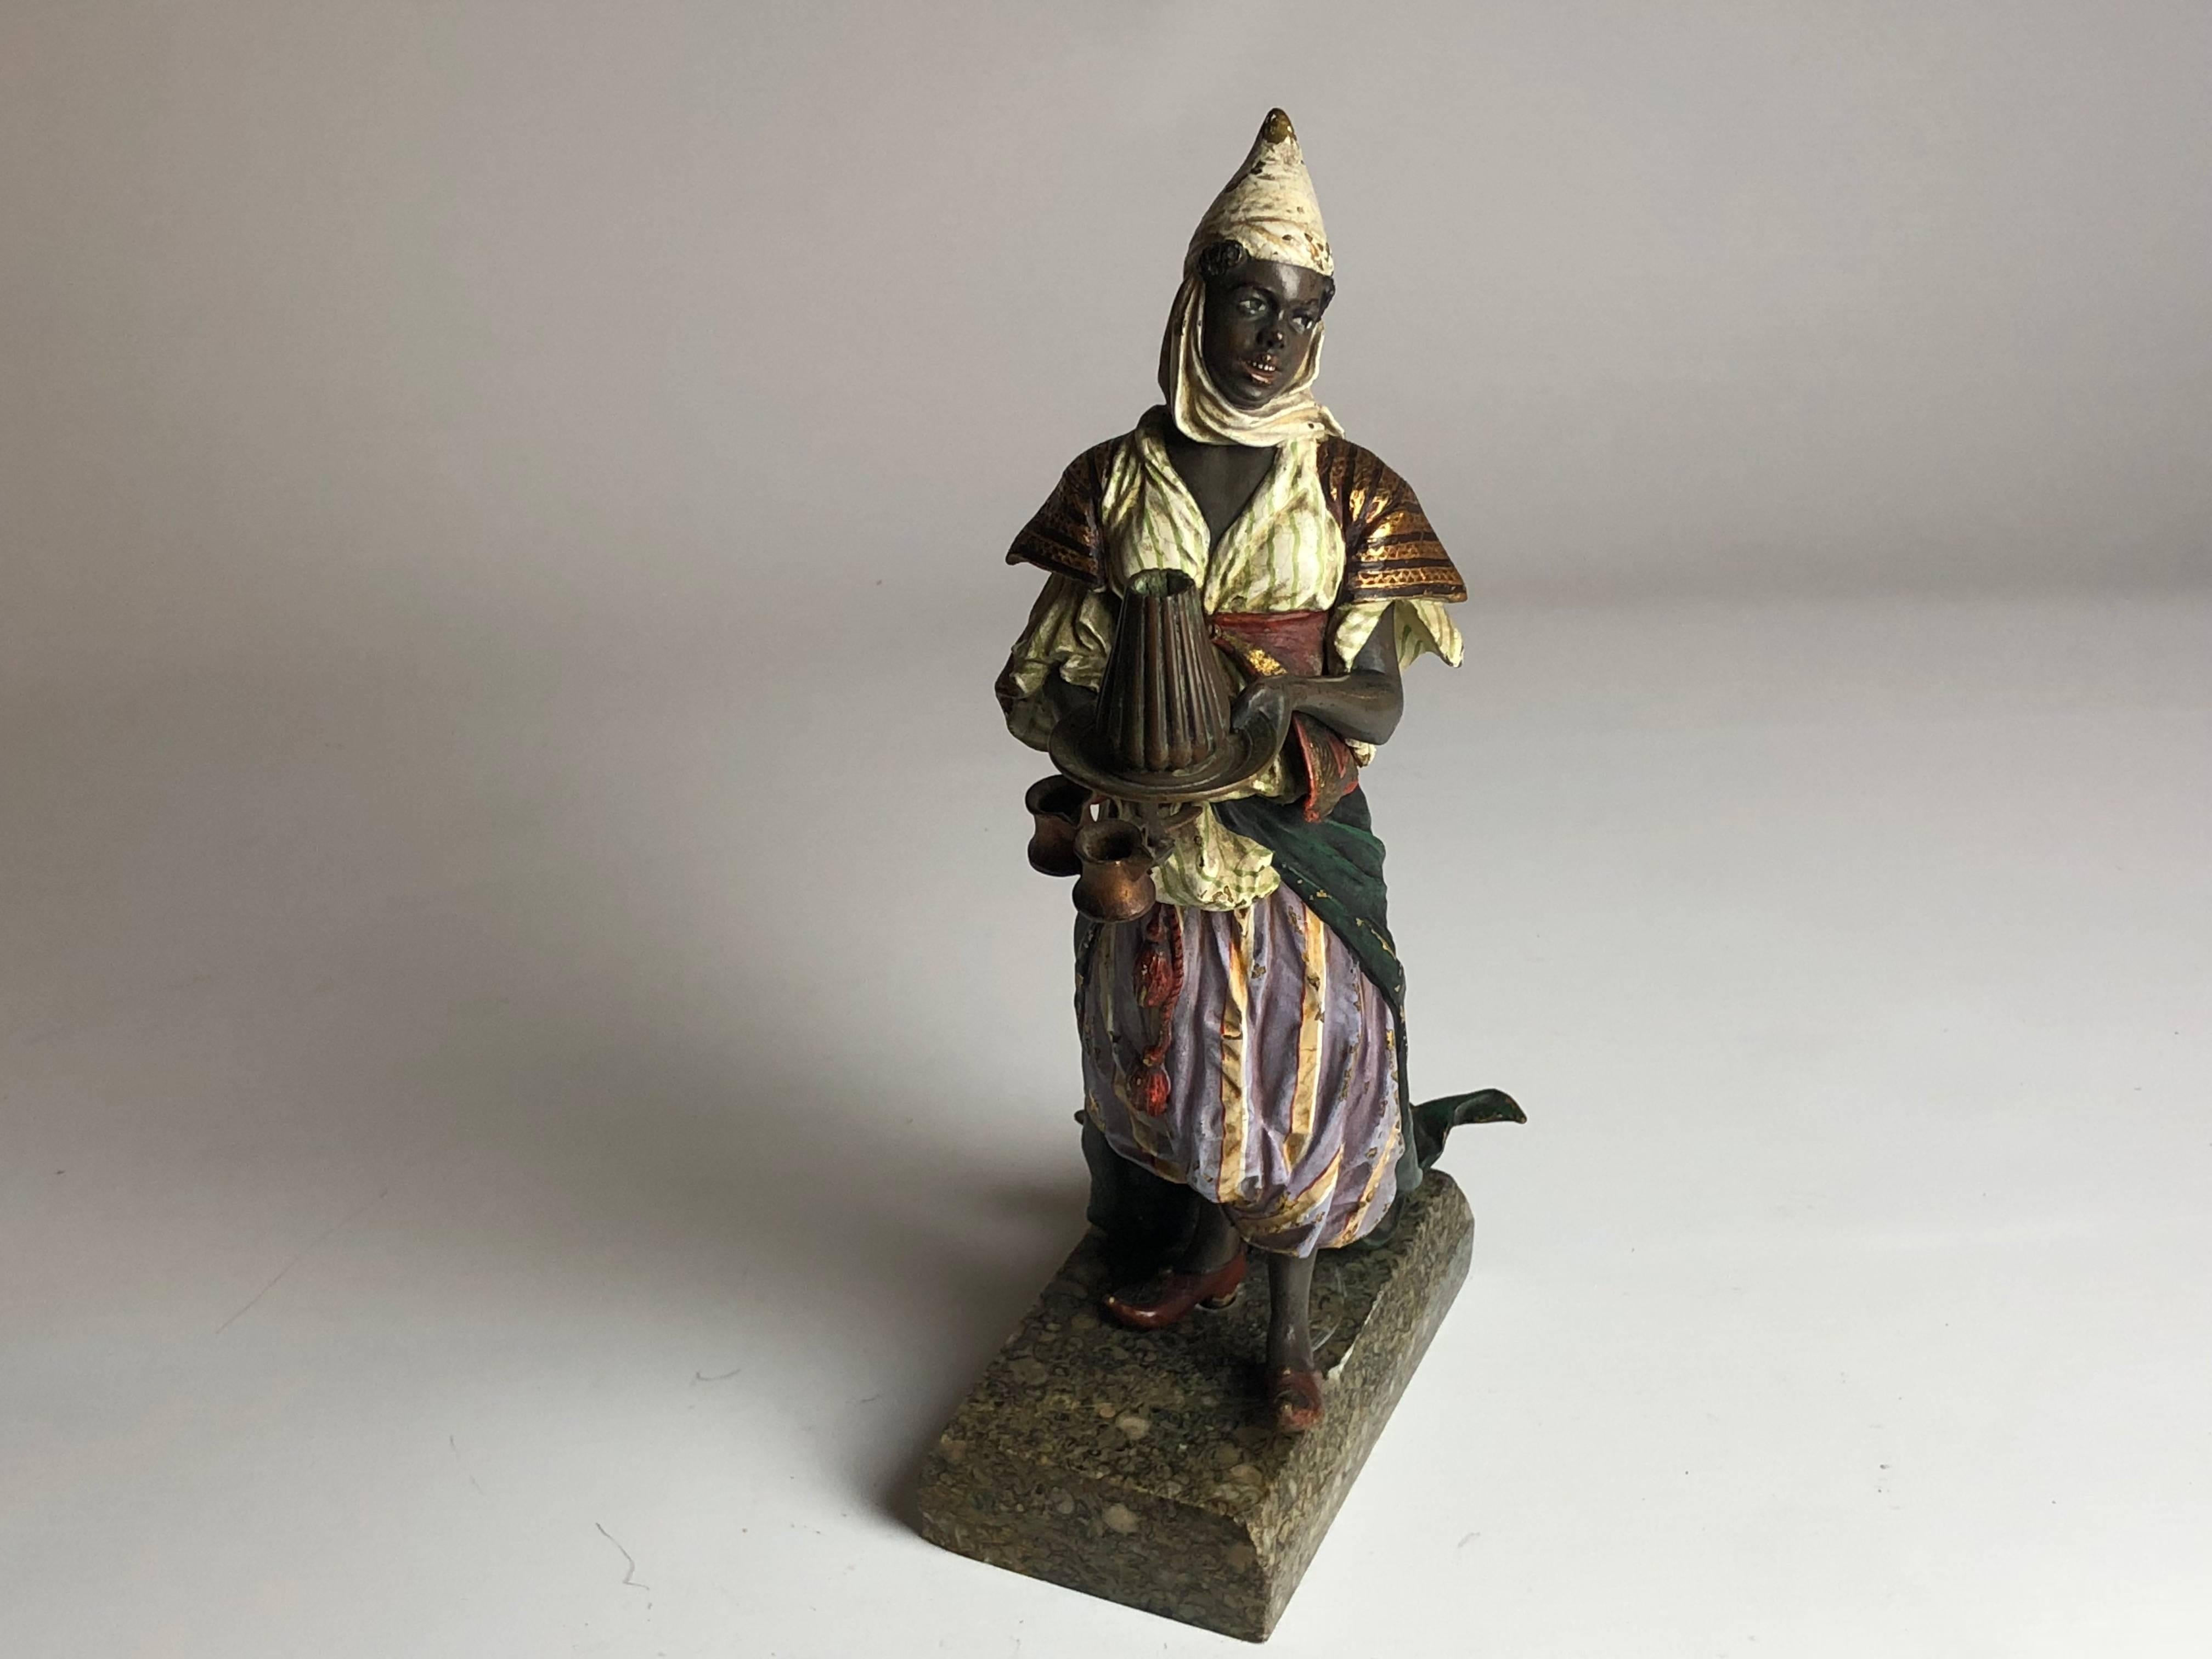 Cold-Painted Vienna Bergman Bronze Gilded and Cold Painted Figure, circa 1900